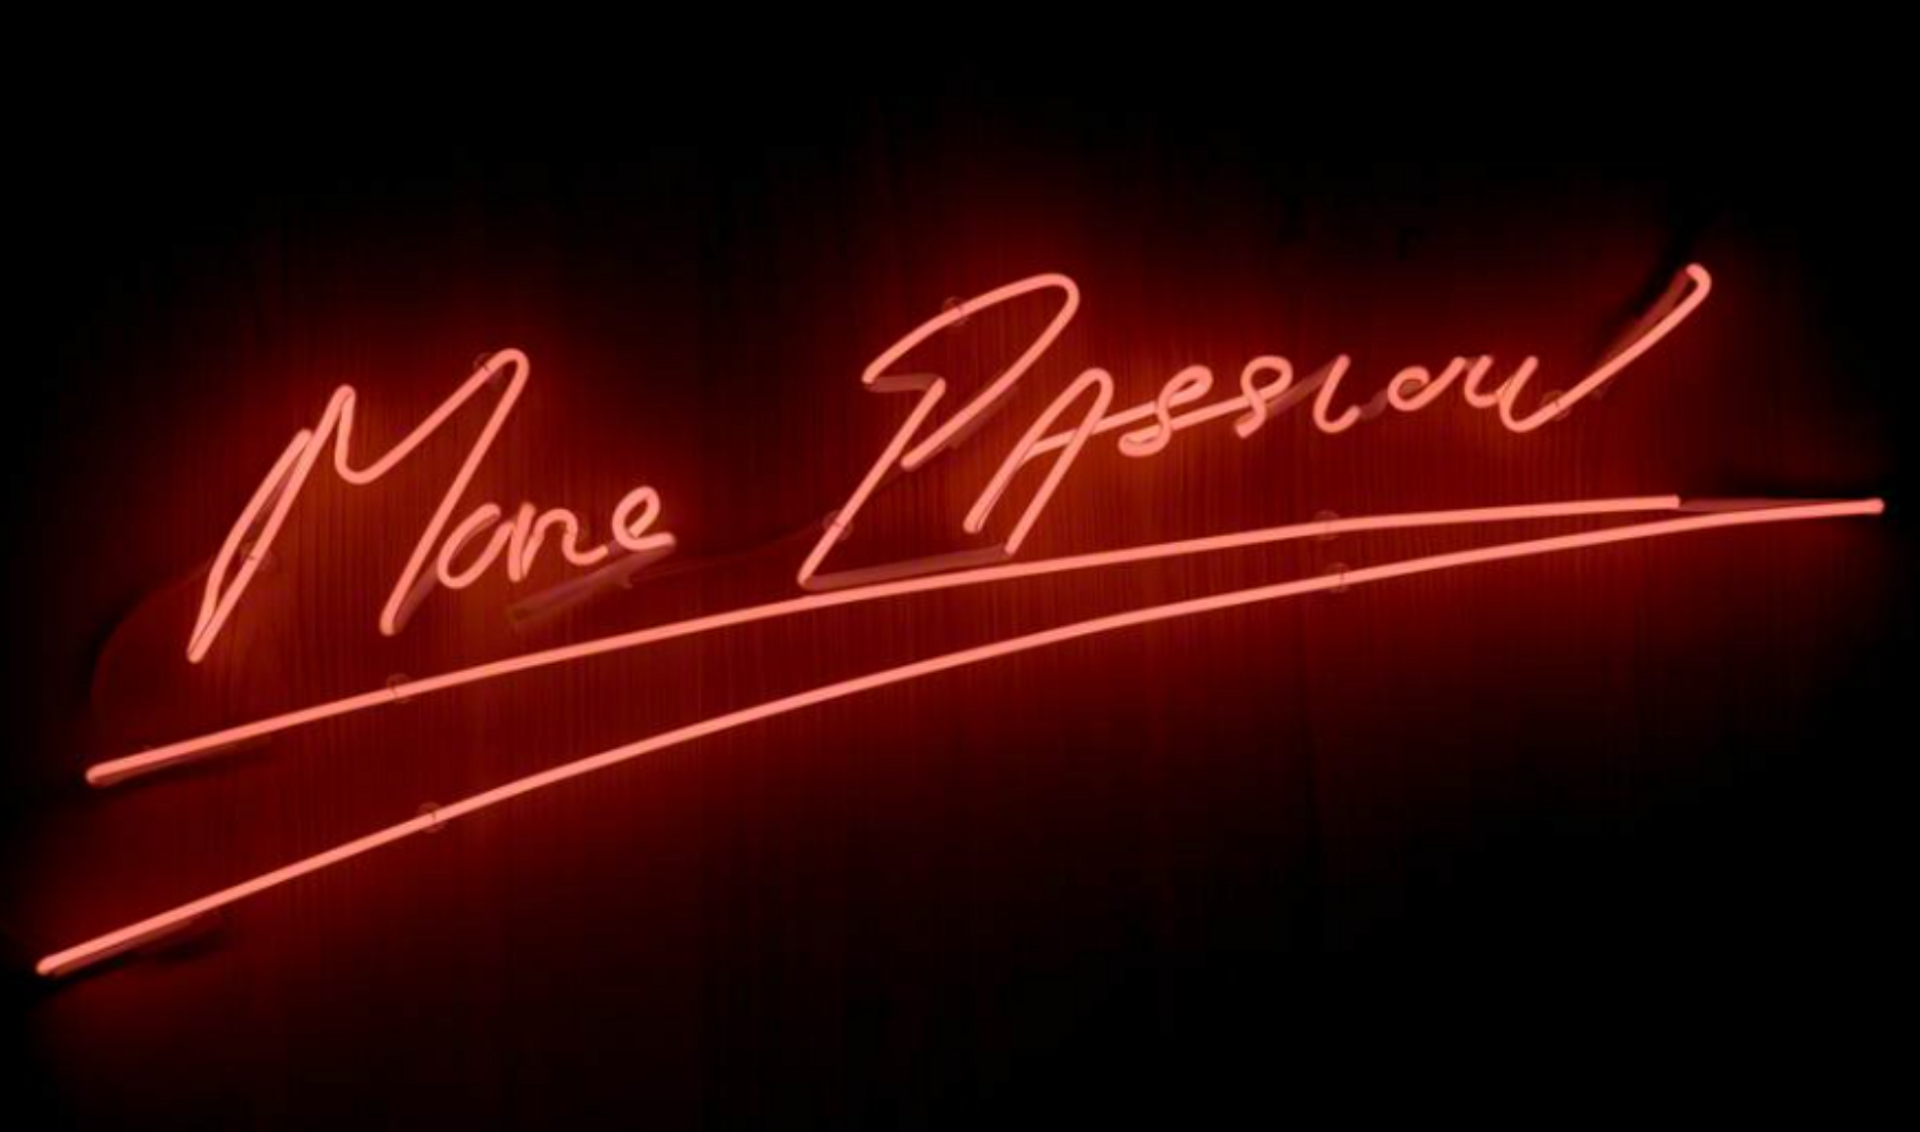 More Passion by Tracey Emin